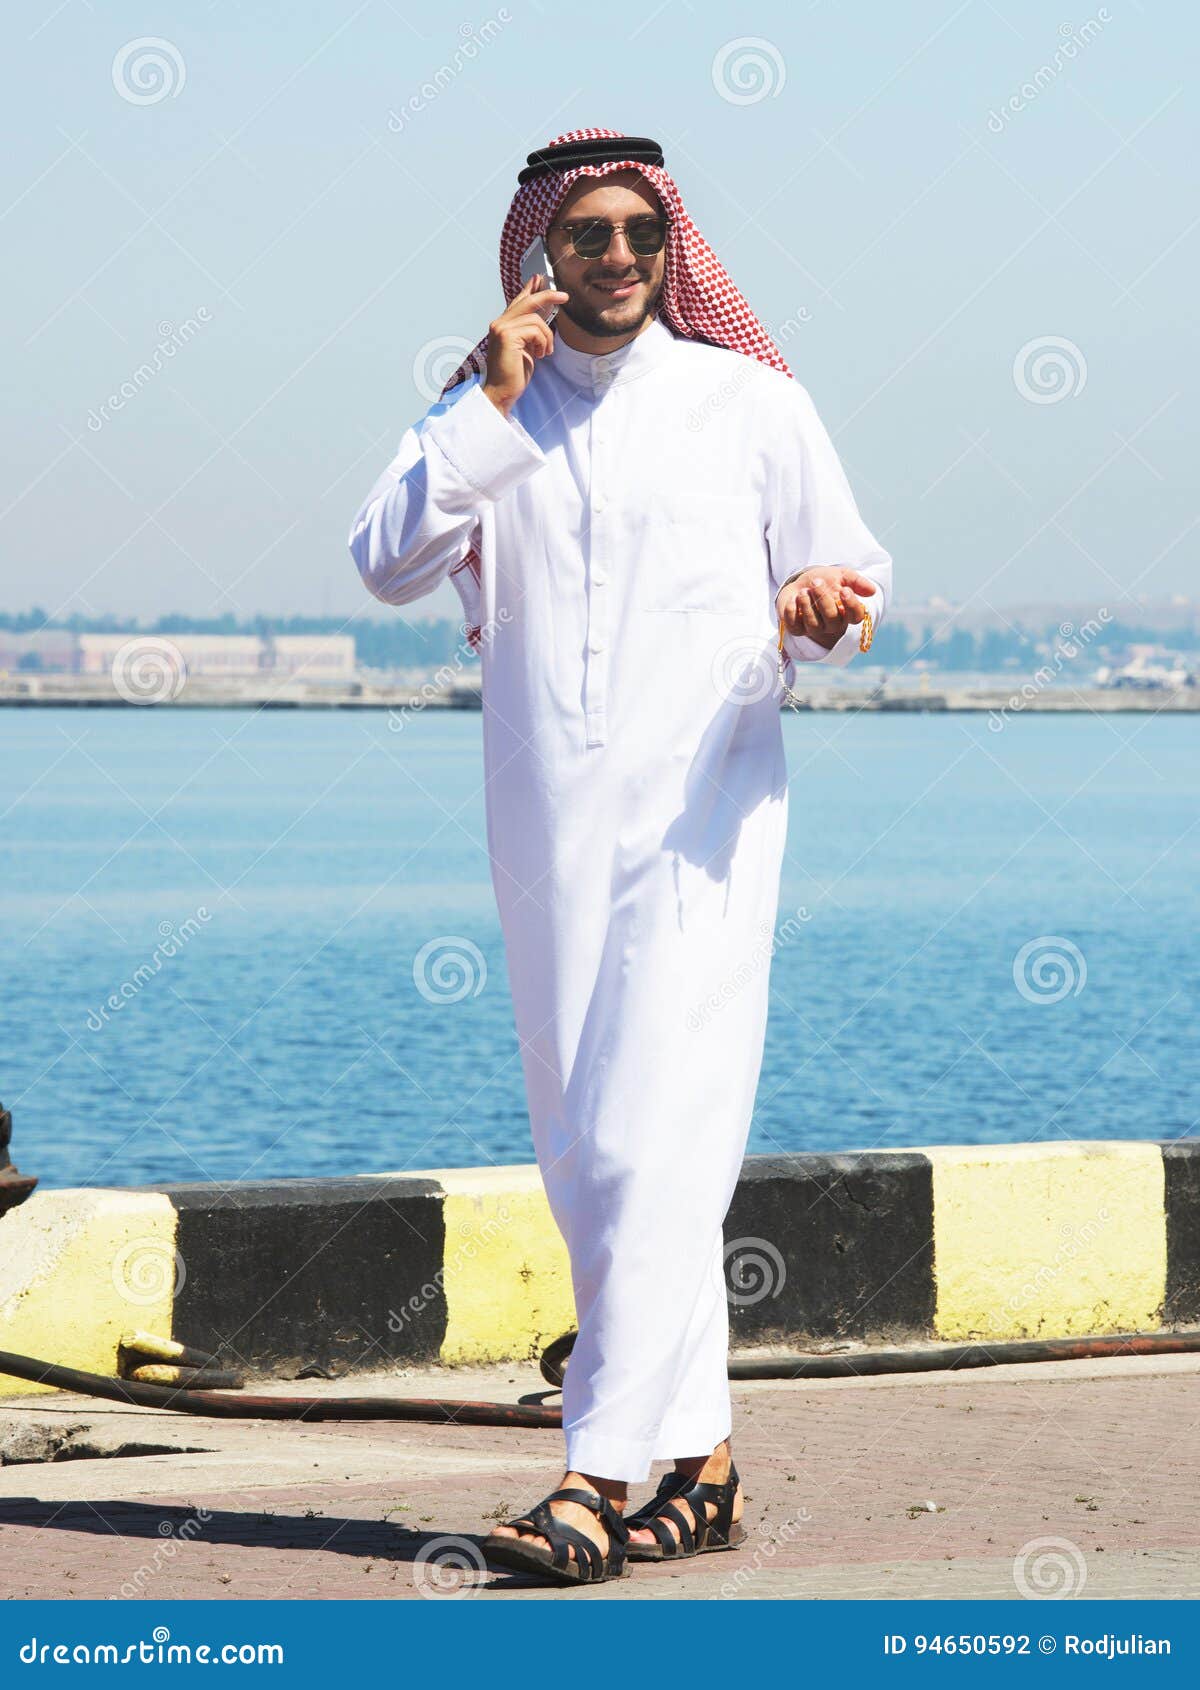 Arabian Man Talking on the Cell Phone in the Port Stock Photo - Image ...